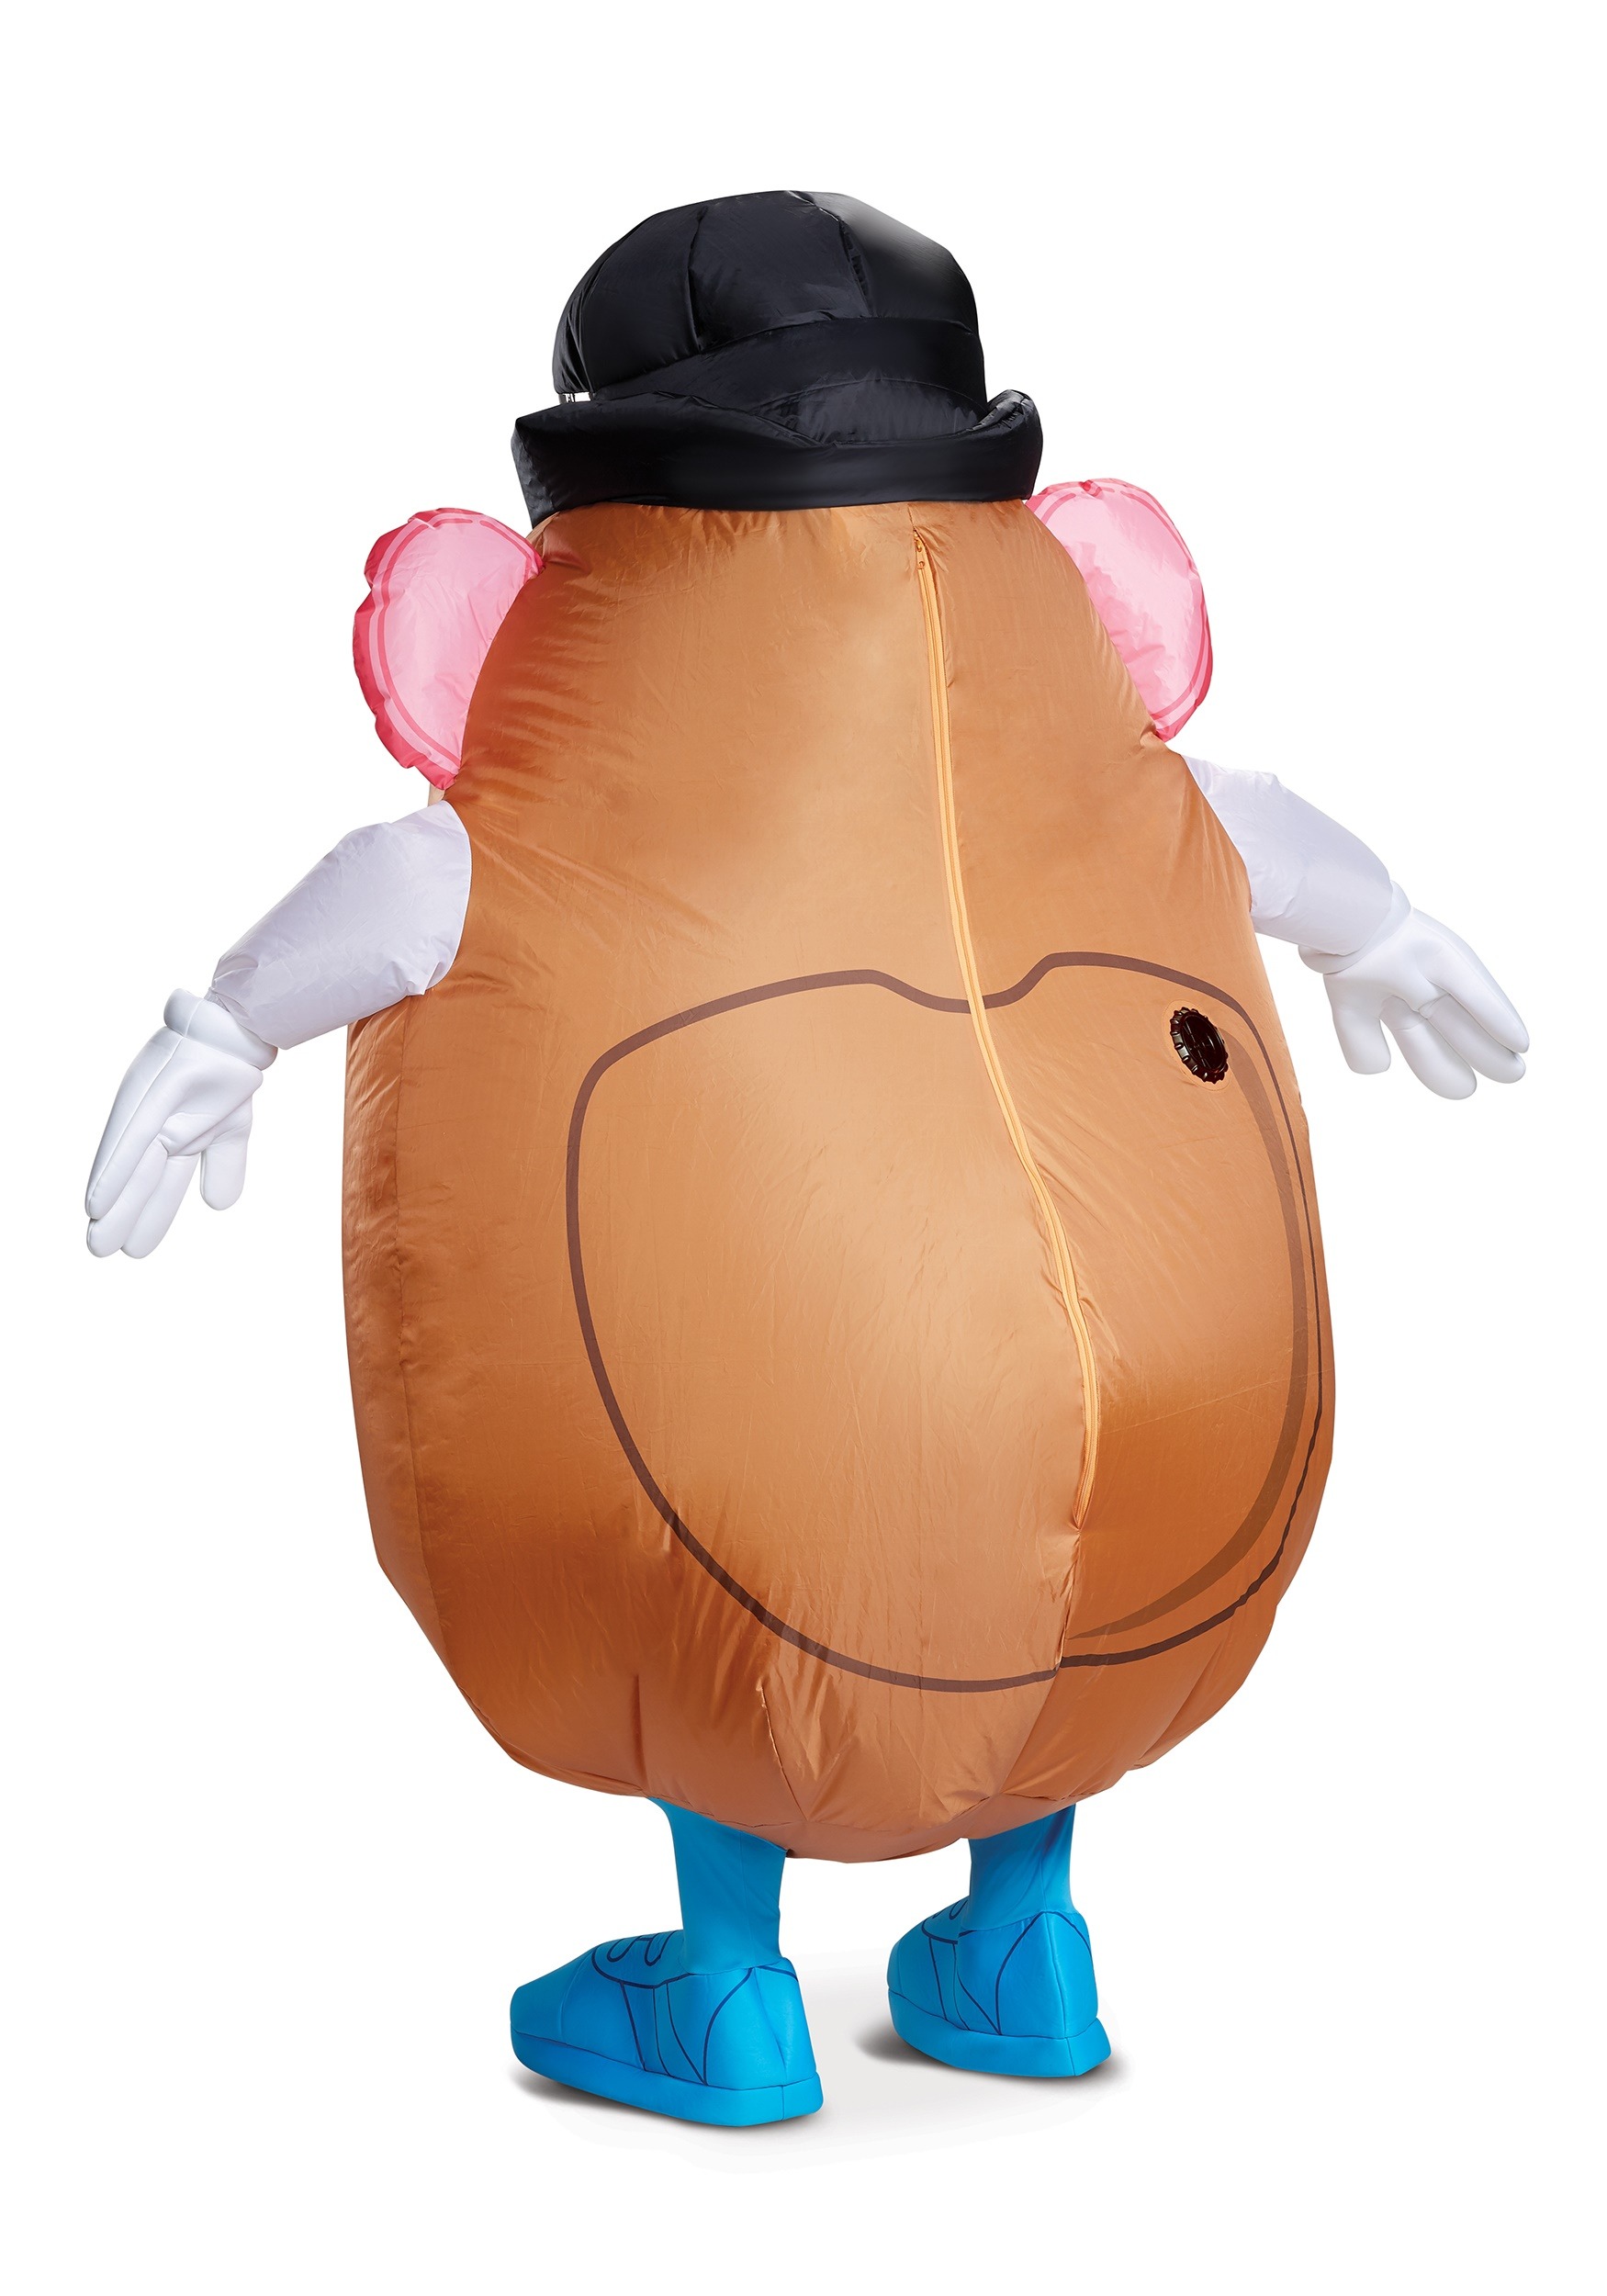 mr-potato-head-costume-for-adults-inflatable